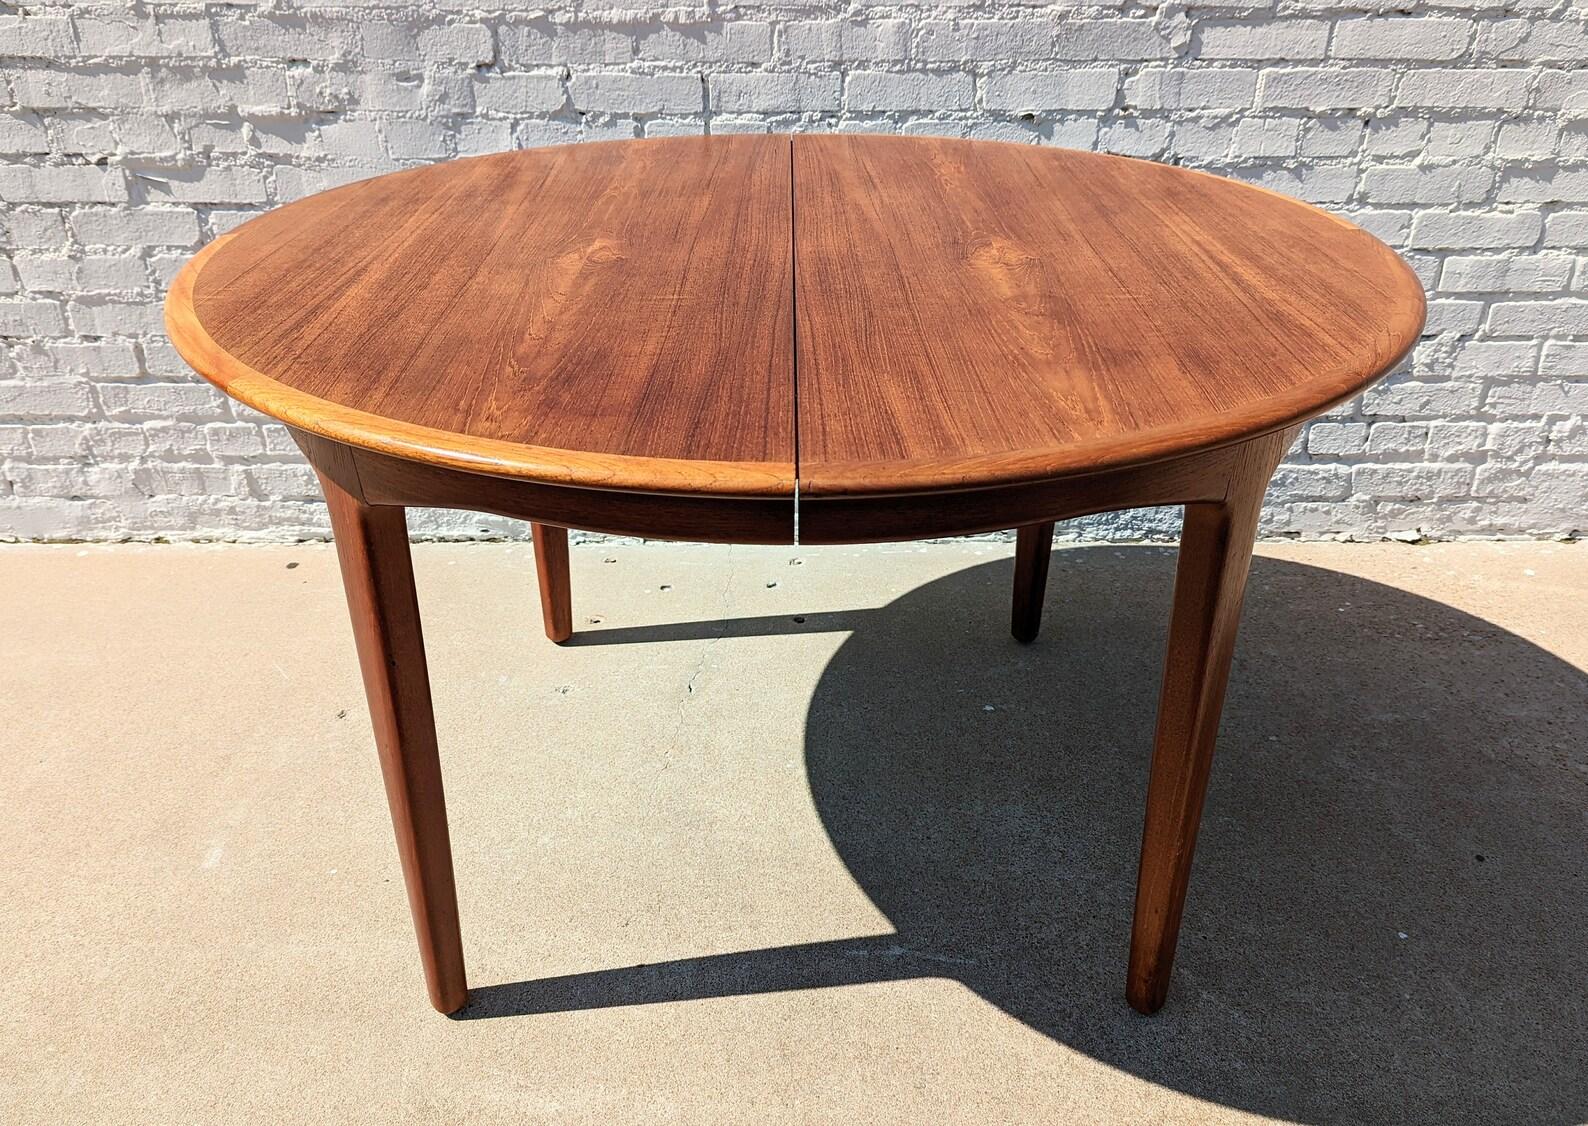 Mid Century Danish Modern Dining Table by Moller
 
Above average vintage condition and structurally sound. Has some expected slight finish wear and scratching. Top has been refinished at some point and does not have original factory finish. Top has